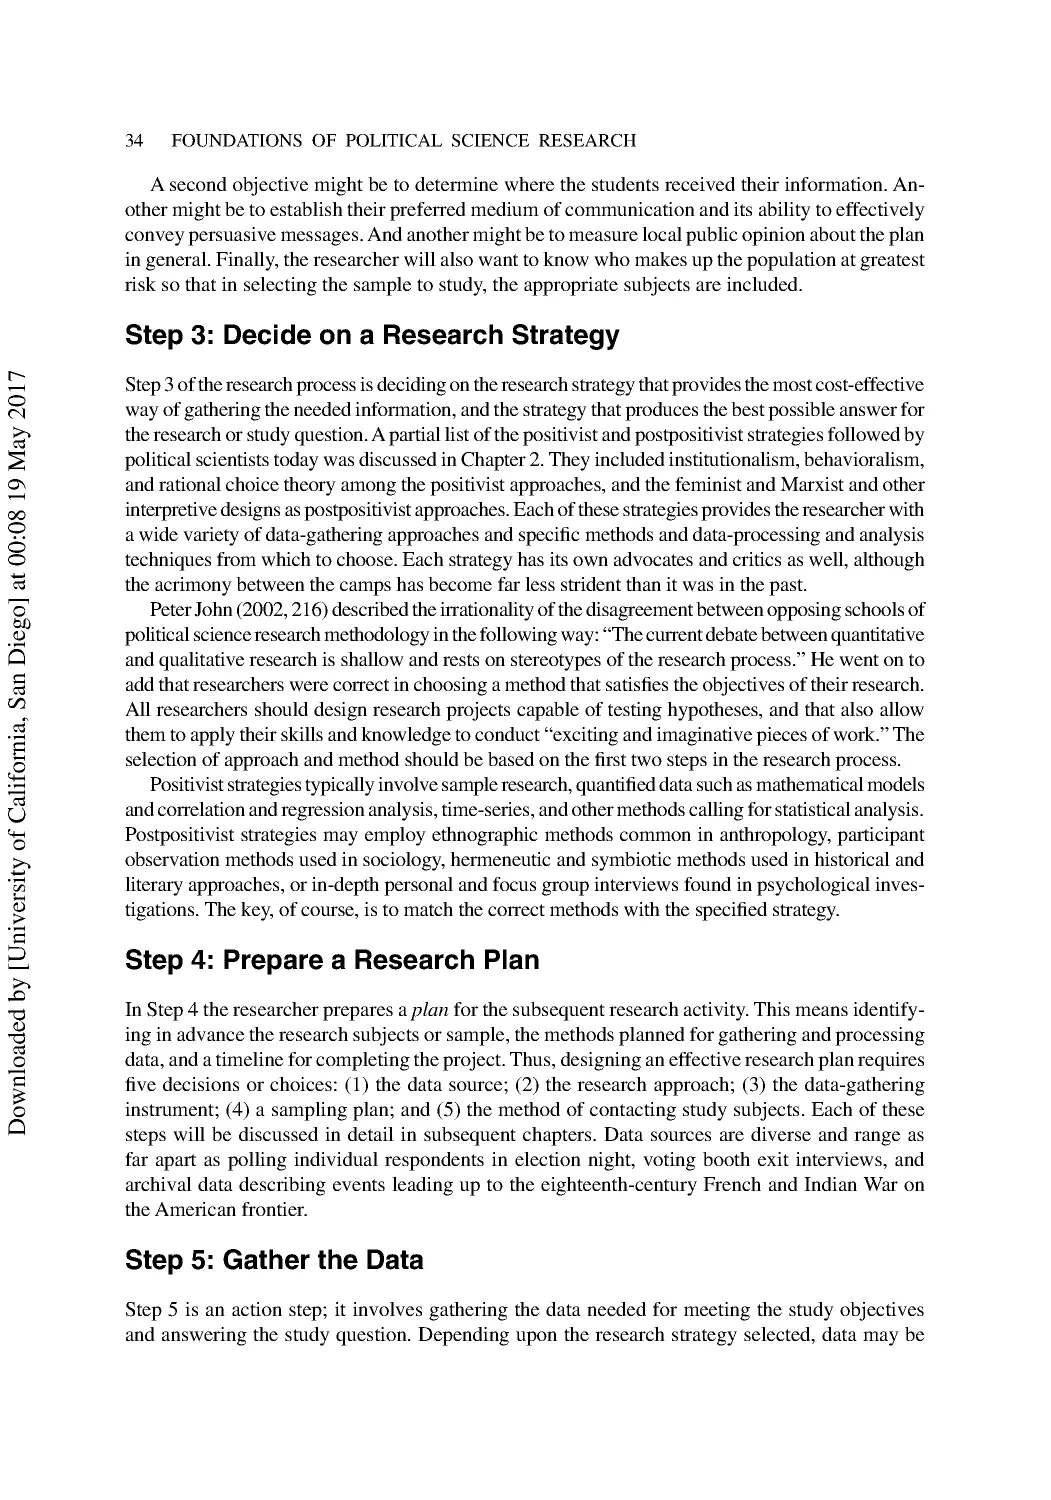 Step 3: Decide on a Research Strategy
Step 4: Prepare a Research Plan
Step 5: Gather the Data